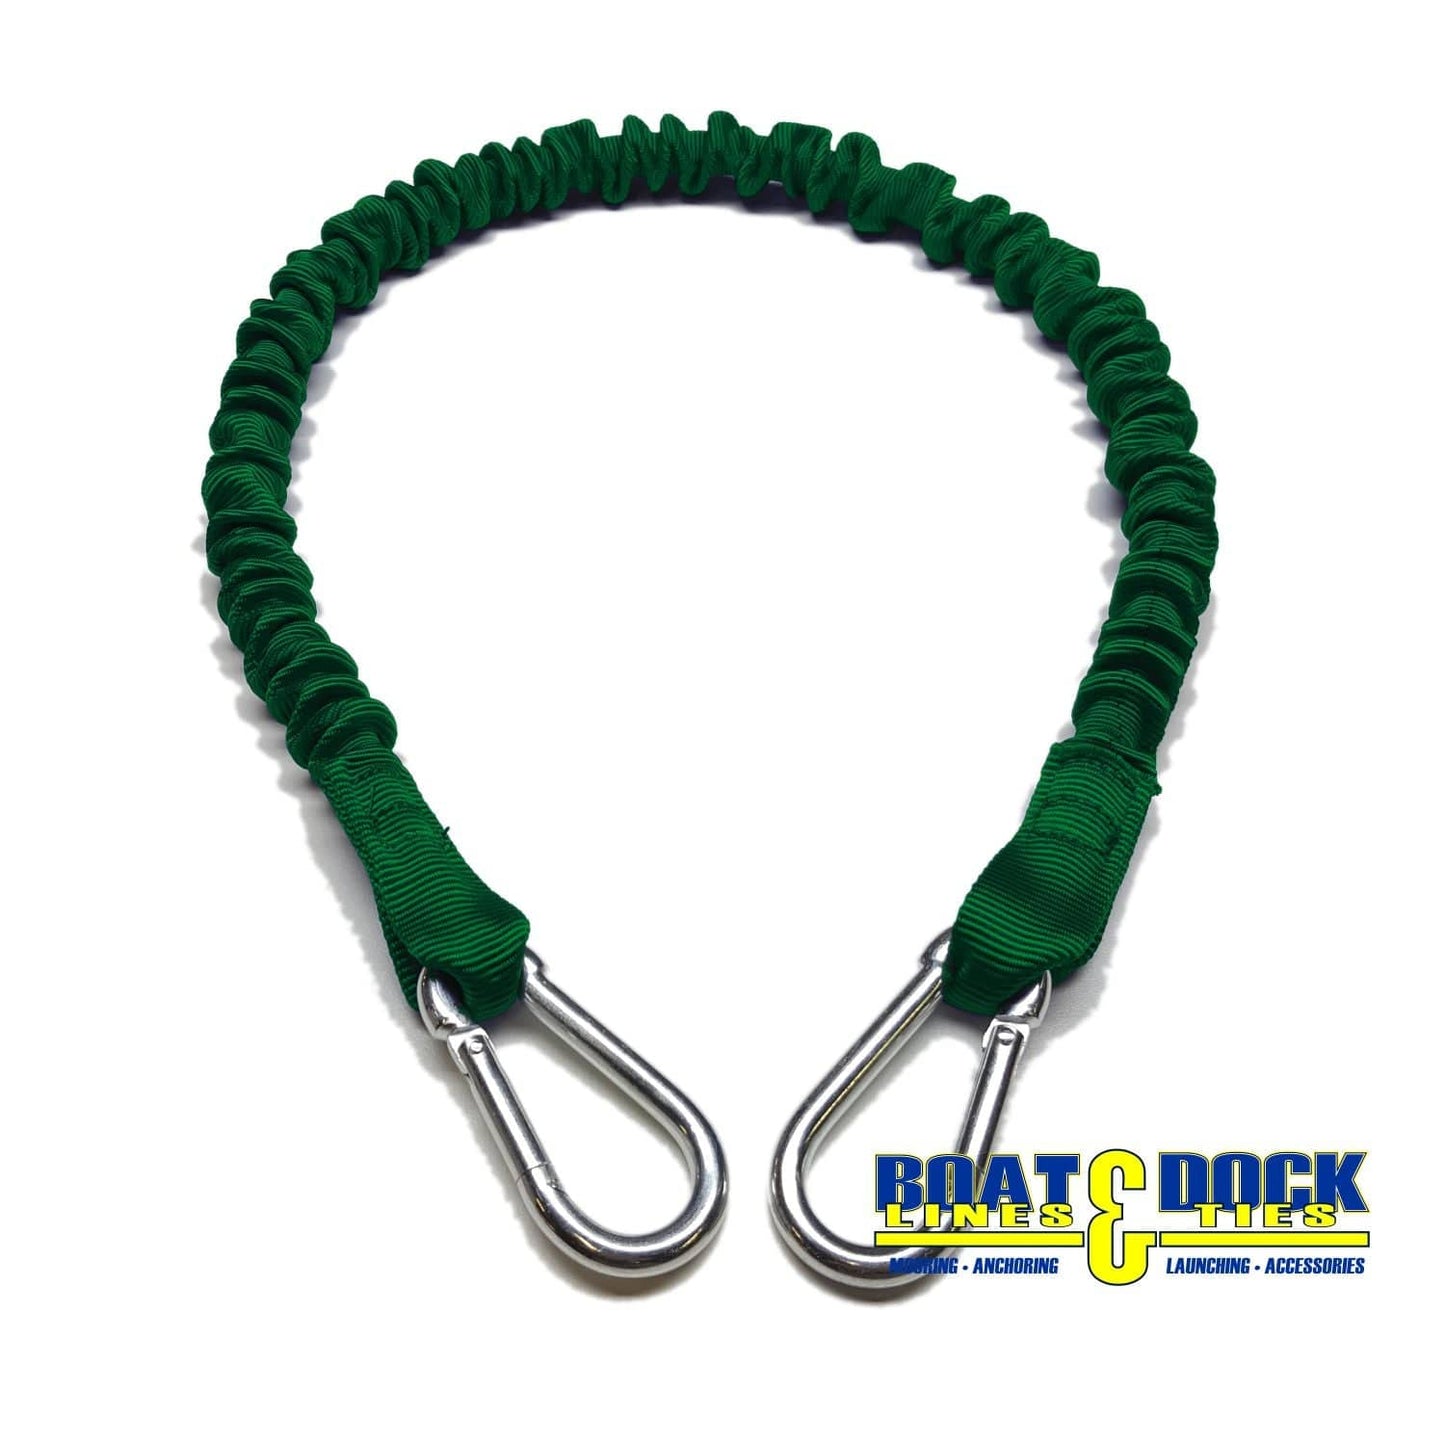 Boat Dock Tie Bungee Cords, 2 Hooked Ends, UV Protected Bungee Cords - Set of 2 - Made in USA - Boat Lines & Dock Ties Boat Lines & Dock Ties 24" / Green